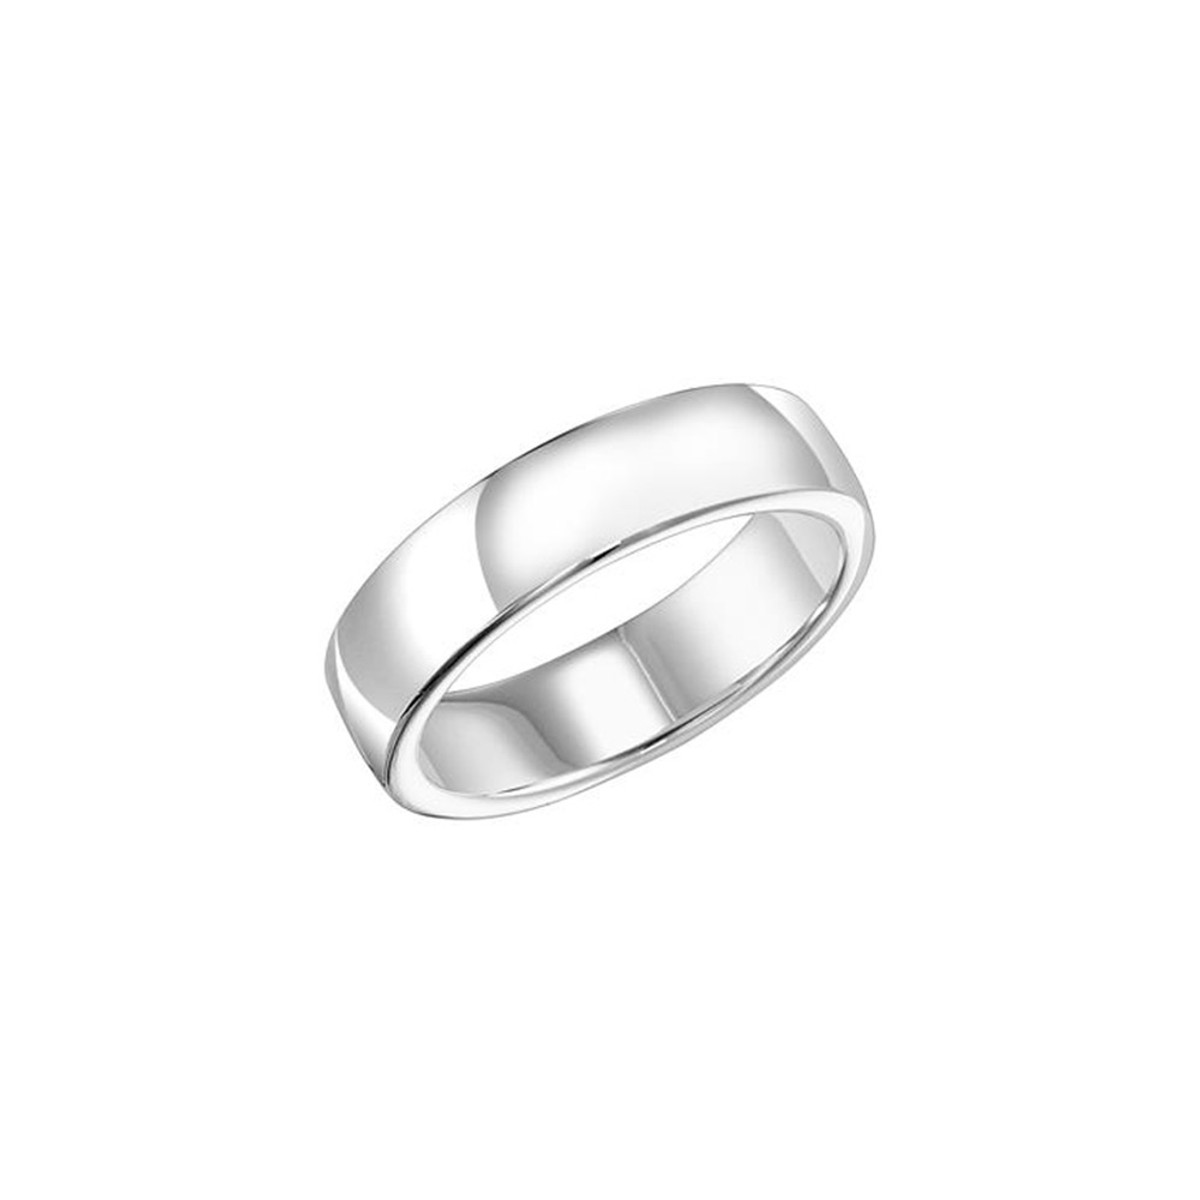 Hyde Park Collection 14K White Gold Band Product Image